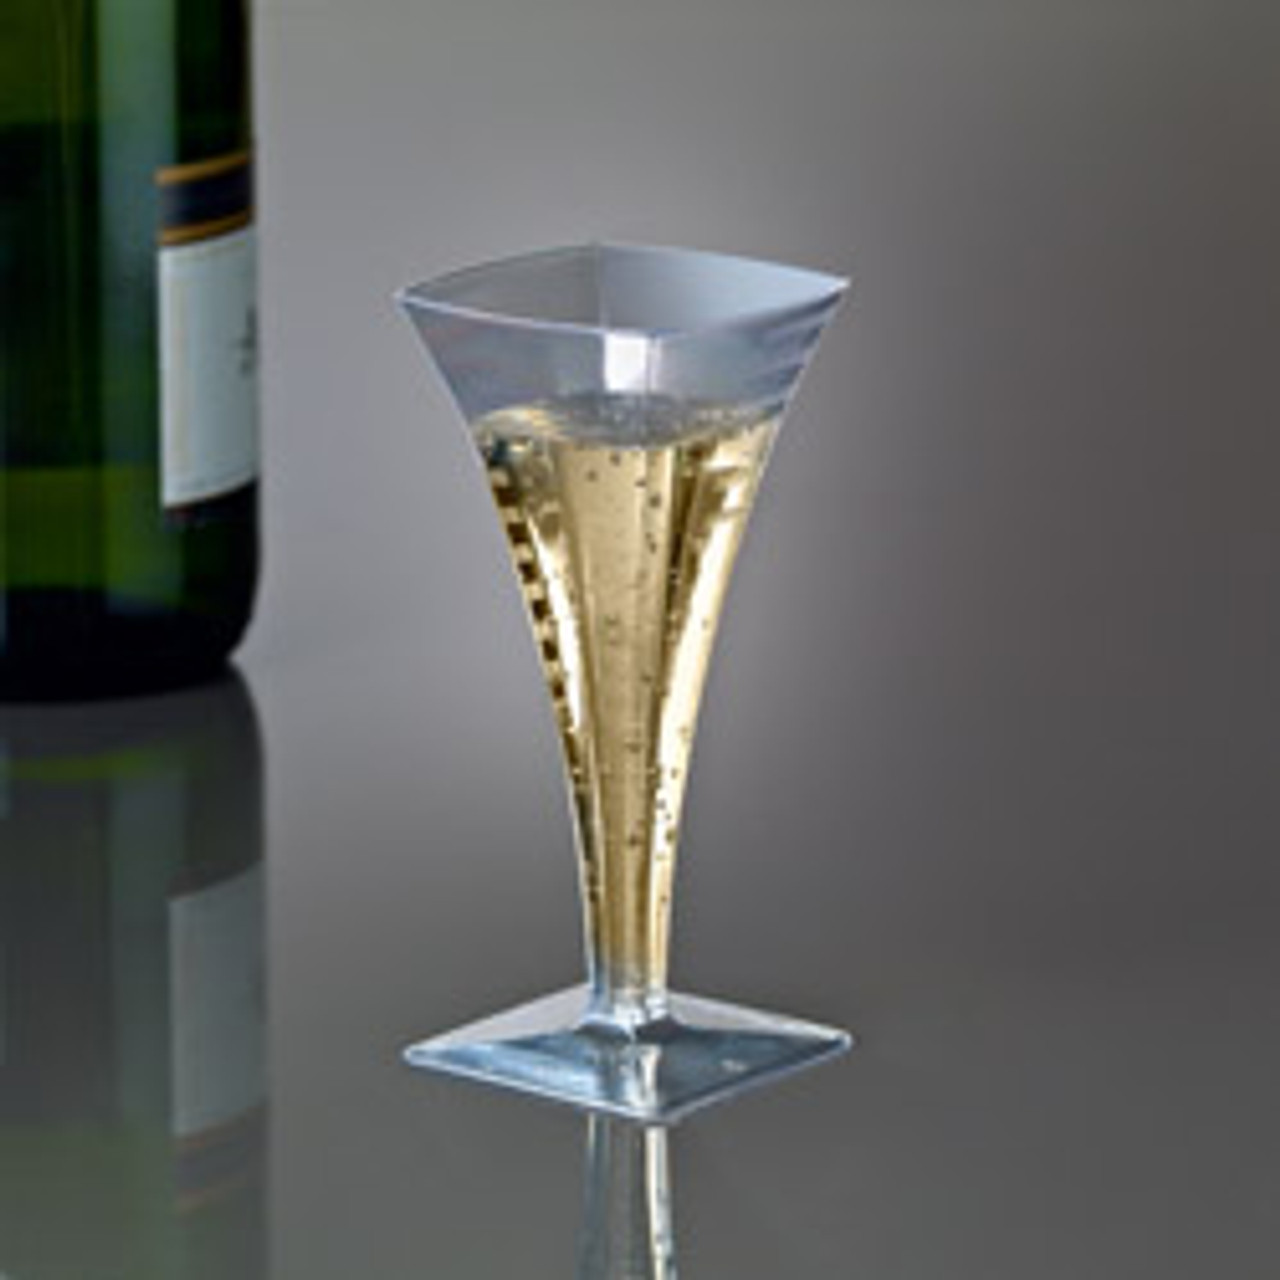 https://cdn11.bigcommerce.com/s-hgqmwywp99/images/stencil/1280x1280/products/49030/43821/2-oz-yoshi-square-plastic-miniature-champagne-flutes-8-ct-15__62062.1675880294.jpg?c=1?imbypass=on